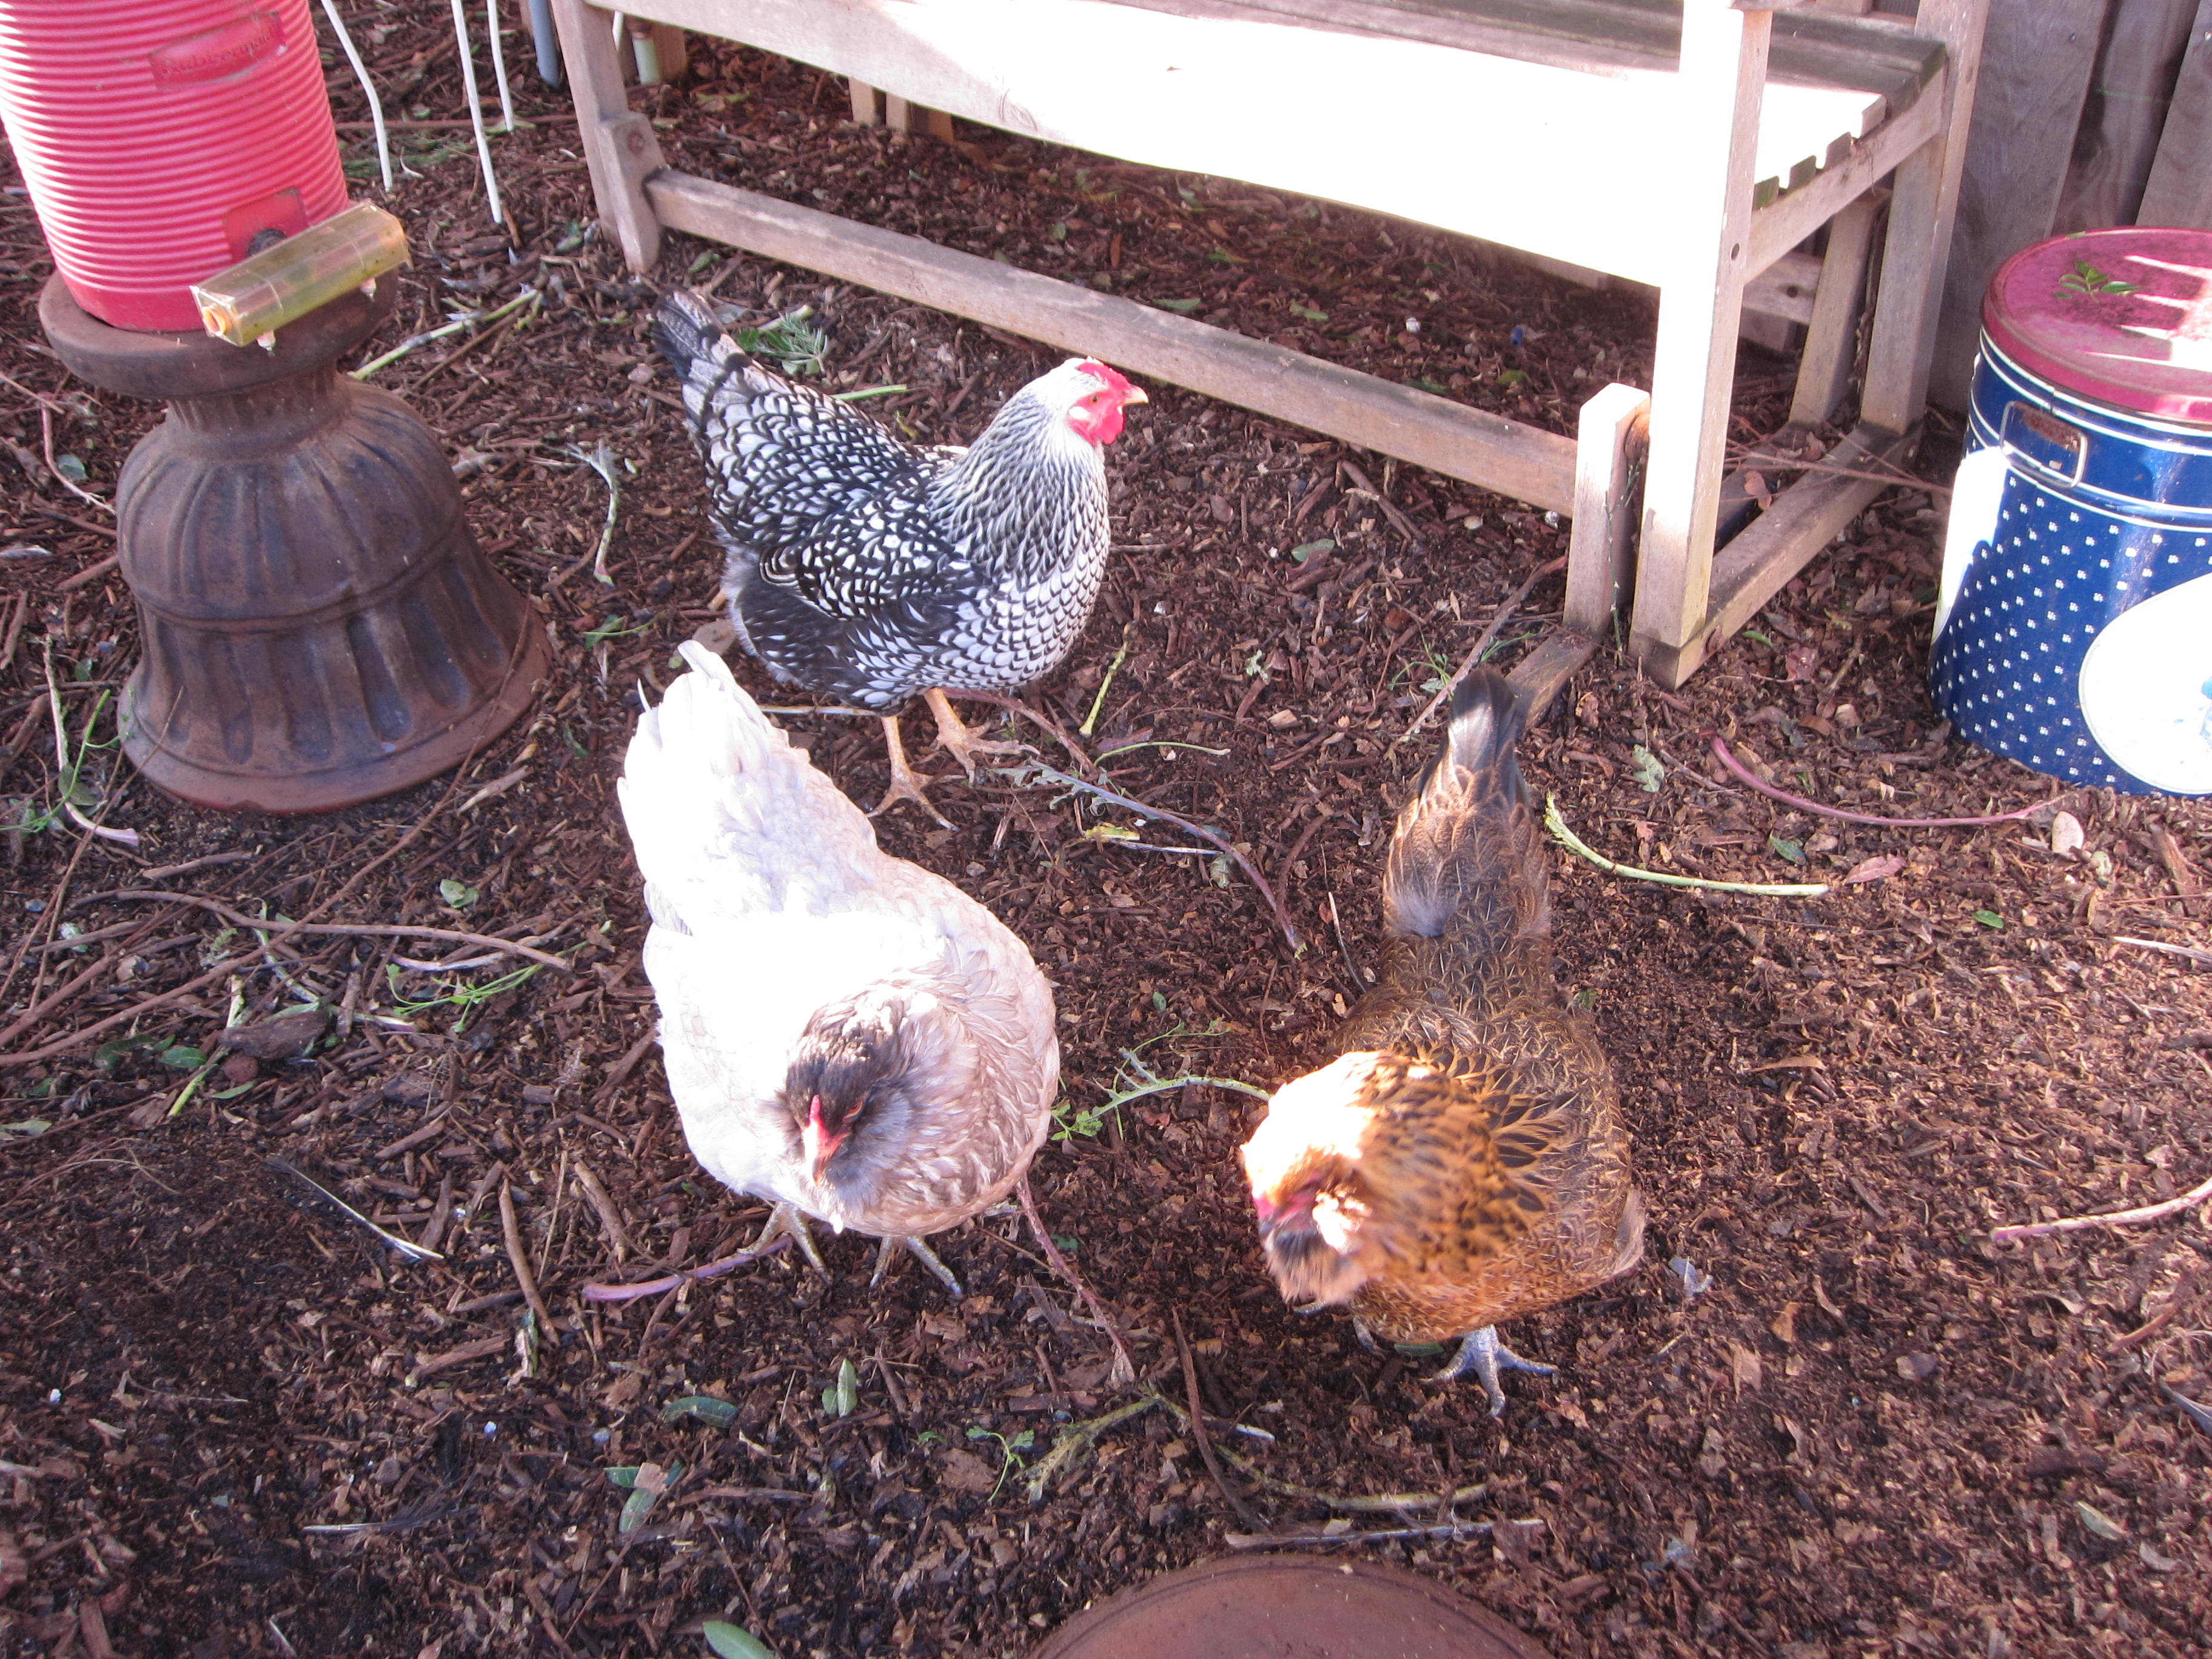 The ladies are out and about. One has started laying again. Come on girls! We want frittatas!